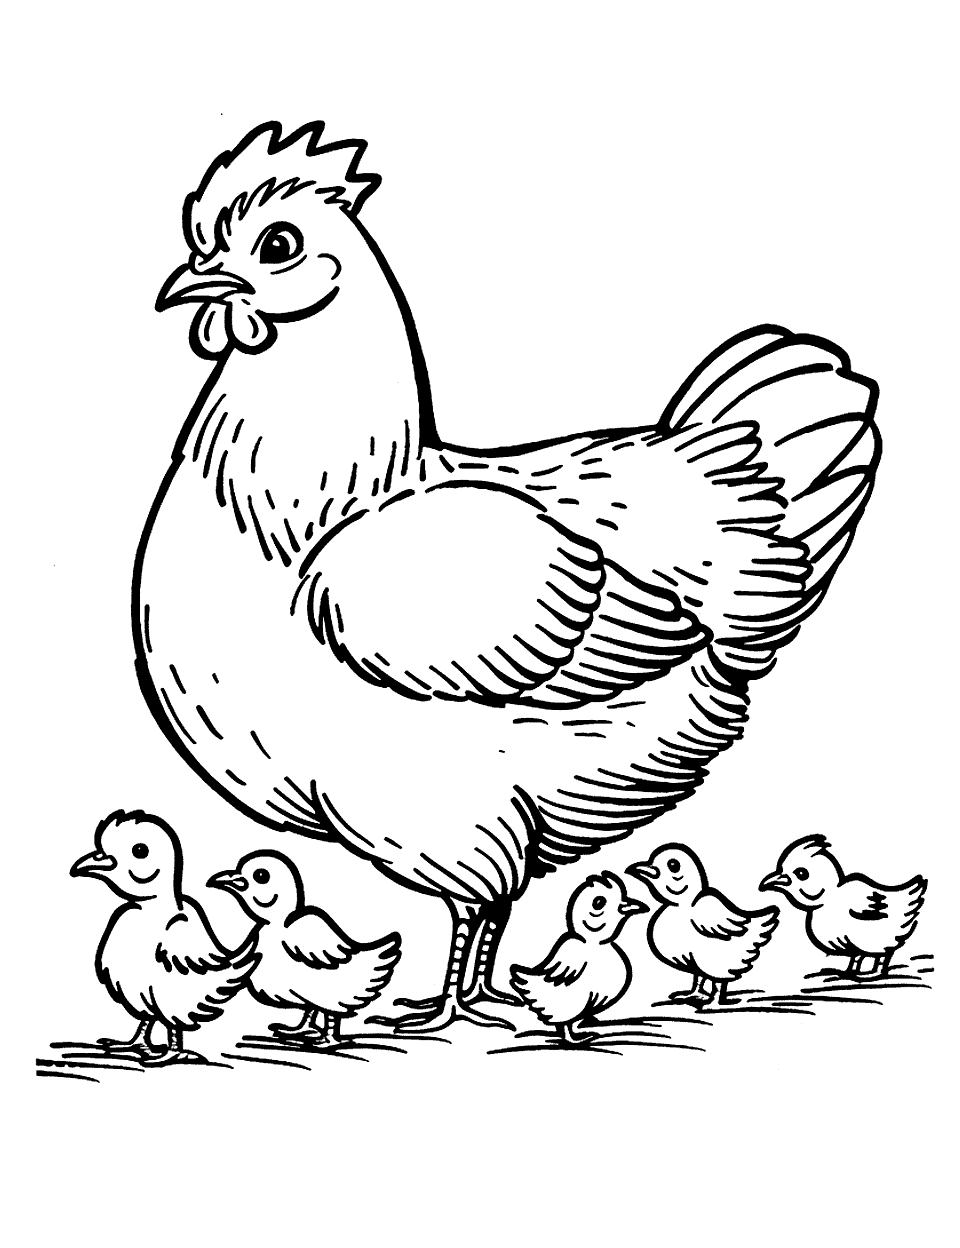 Hen with Chicks in a Row Chicken Coloring Page - A mother hen followed by her chicks, marching together.